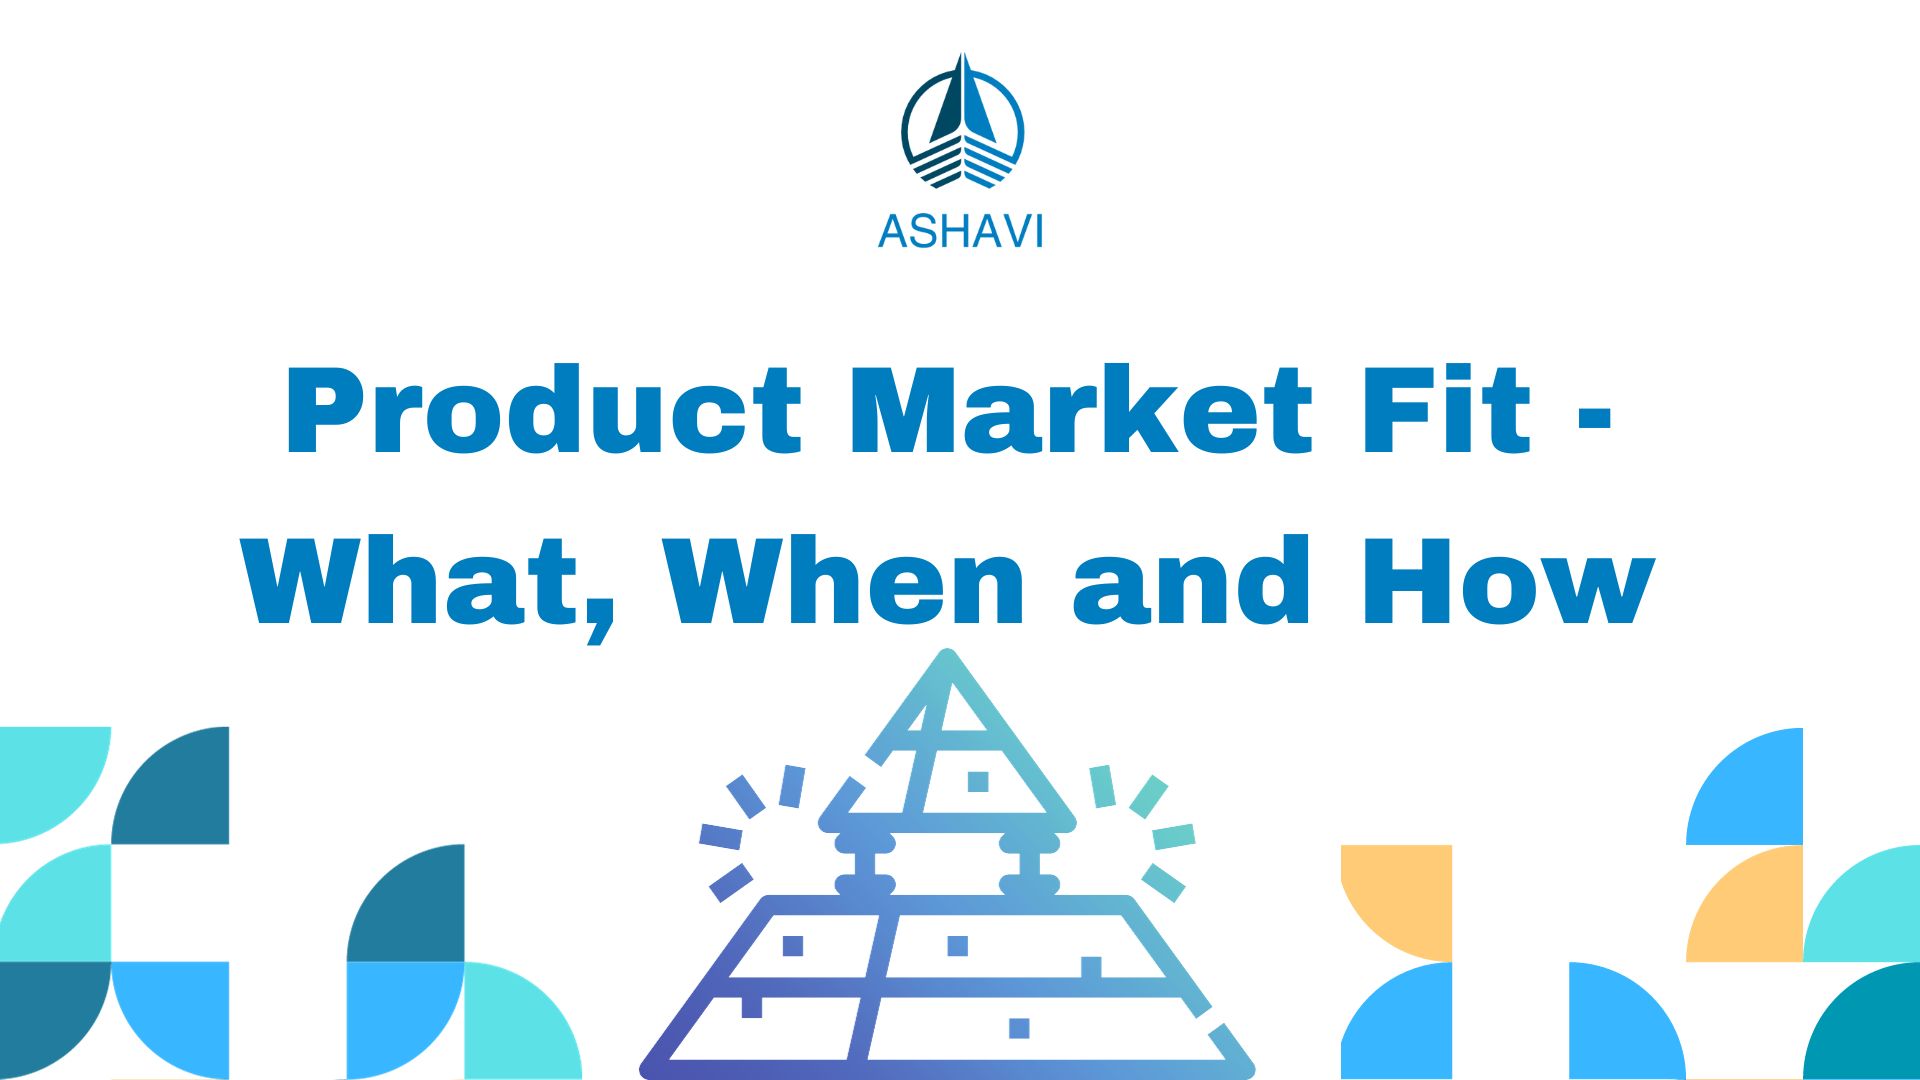 Product Market Fit - What, When and How